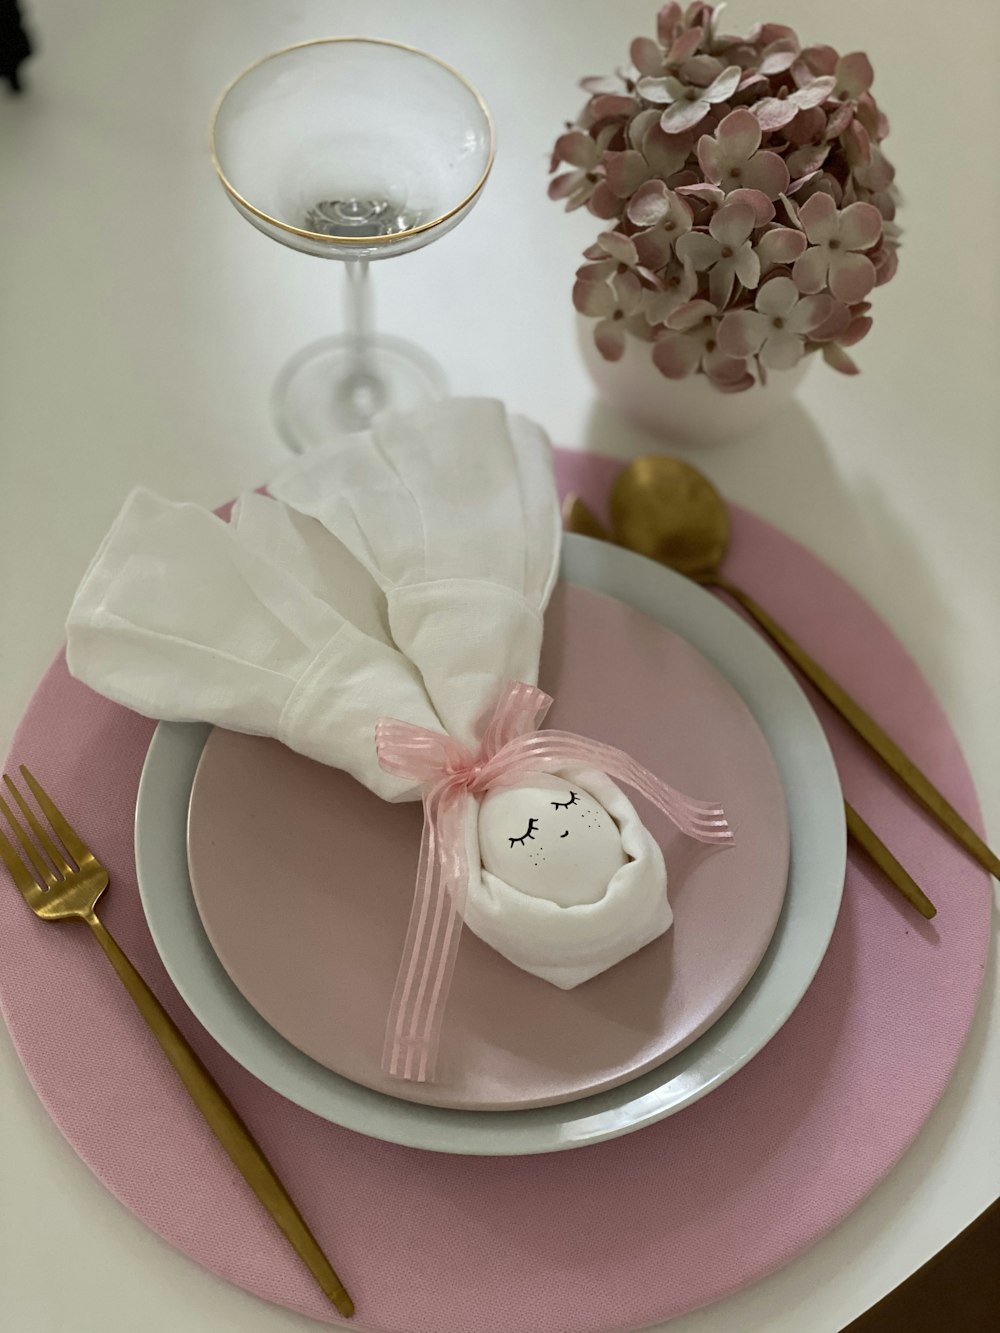 pink and white round cake on pink round plate